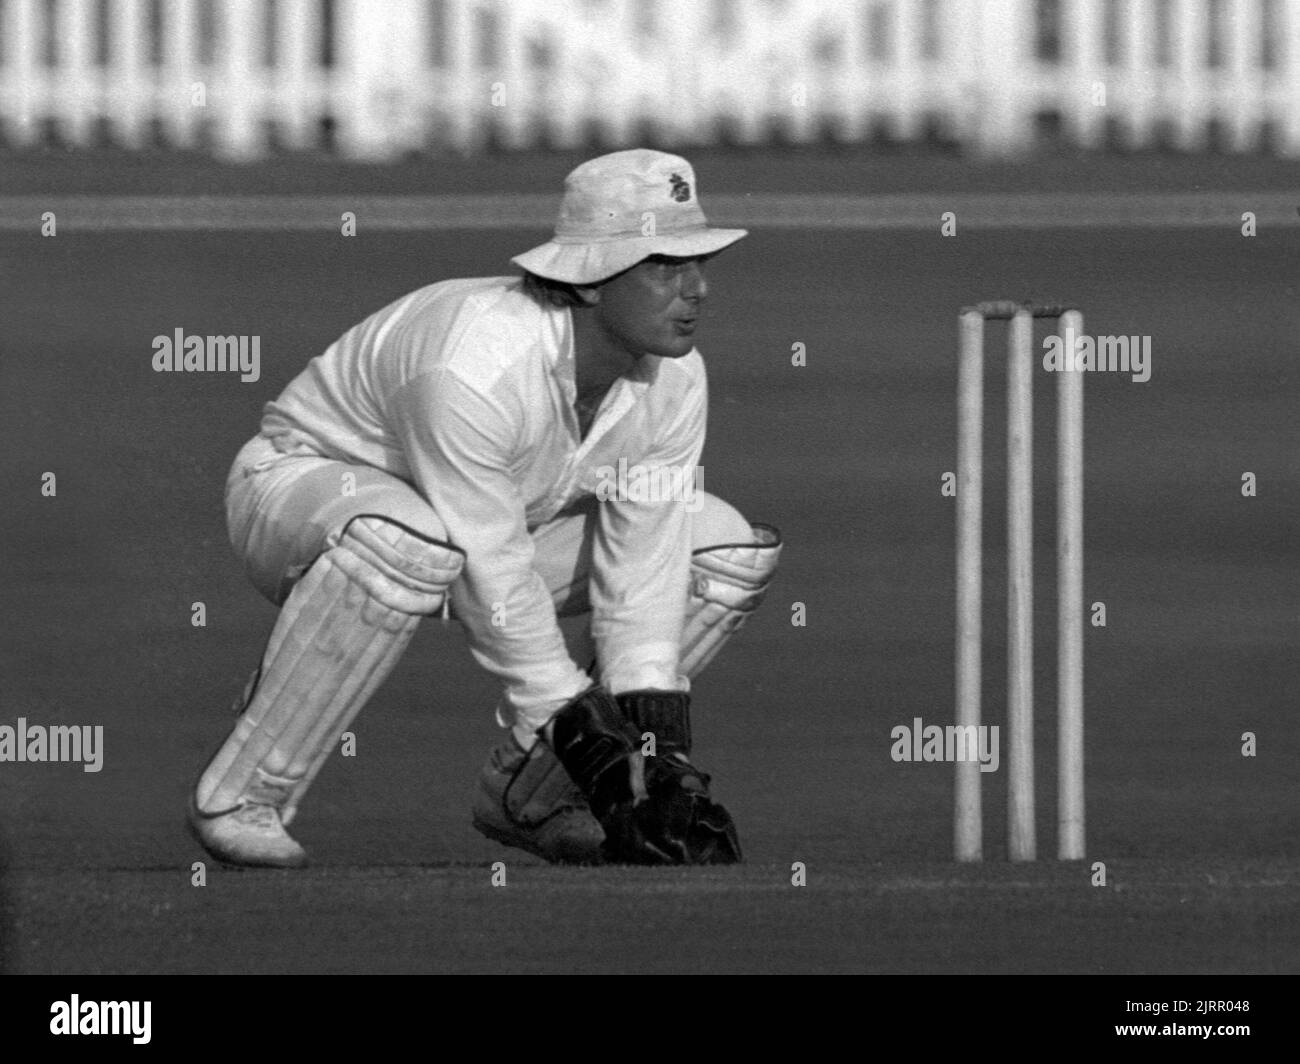 Paul Downton, Wicketkeeper, Middlesex contro Sussex, Refuge Assurance League, (Sunday, 40 overs) al Lord's Cricket Ground, Londra, Inghilterra 30 agosto 1987 Foto Stock